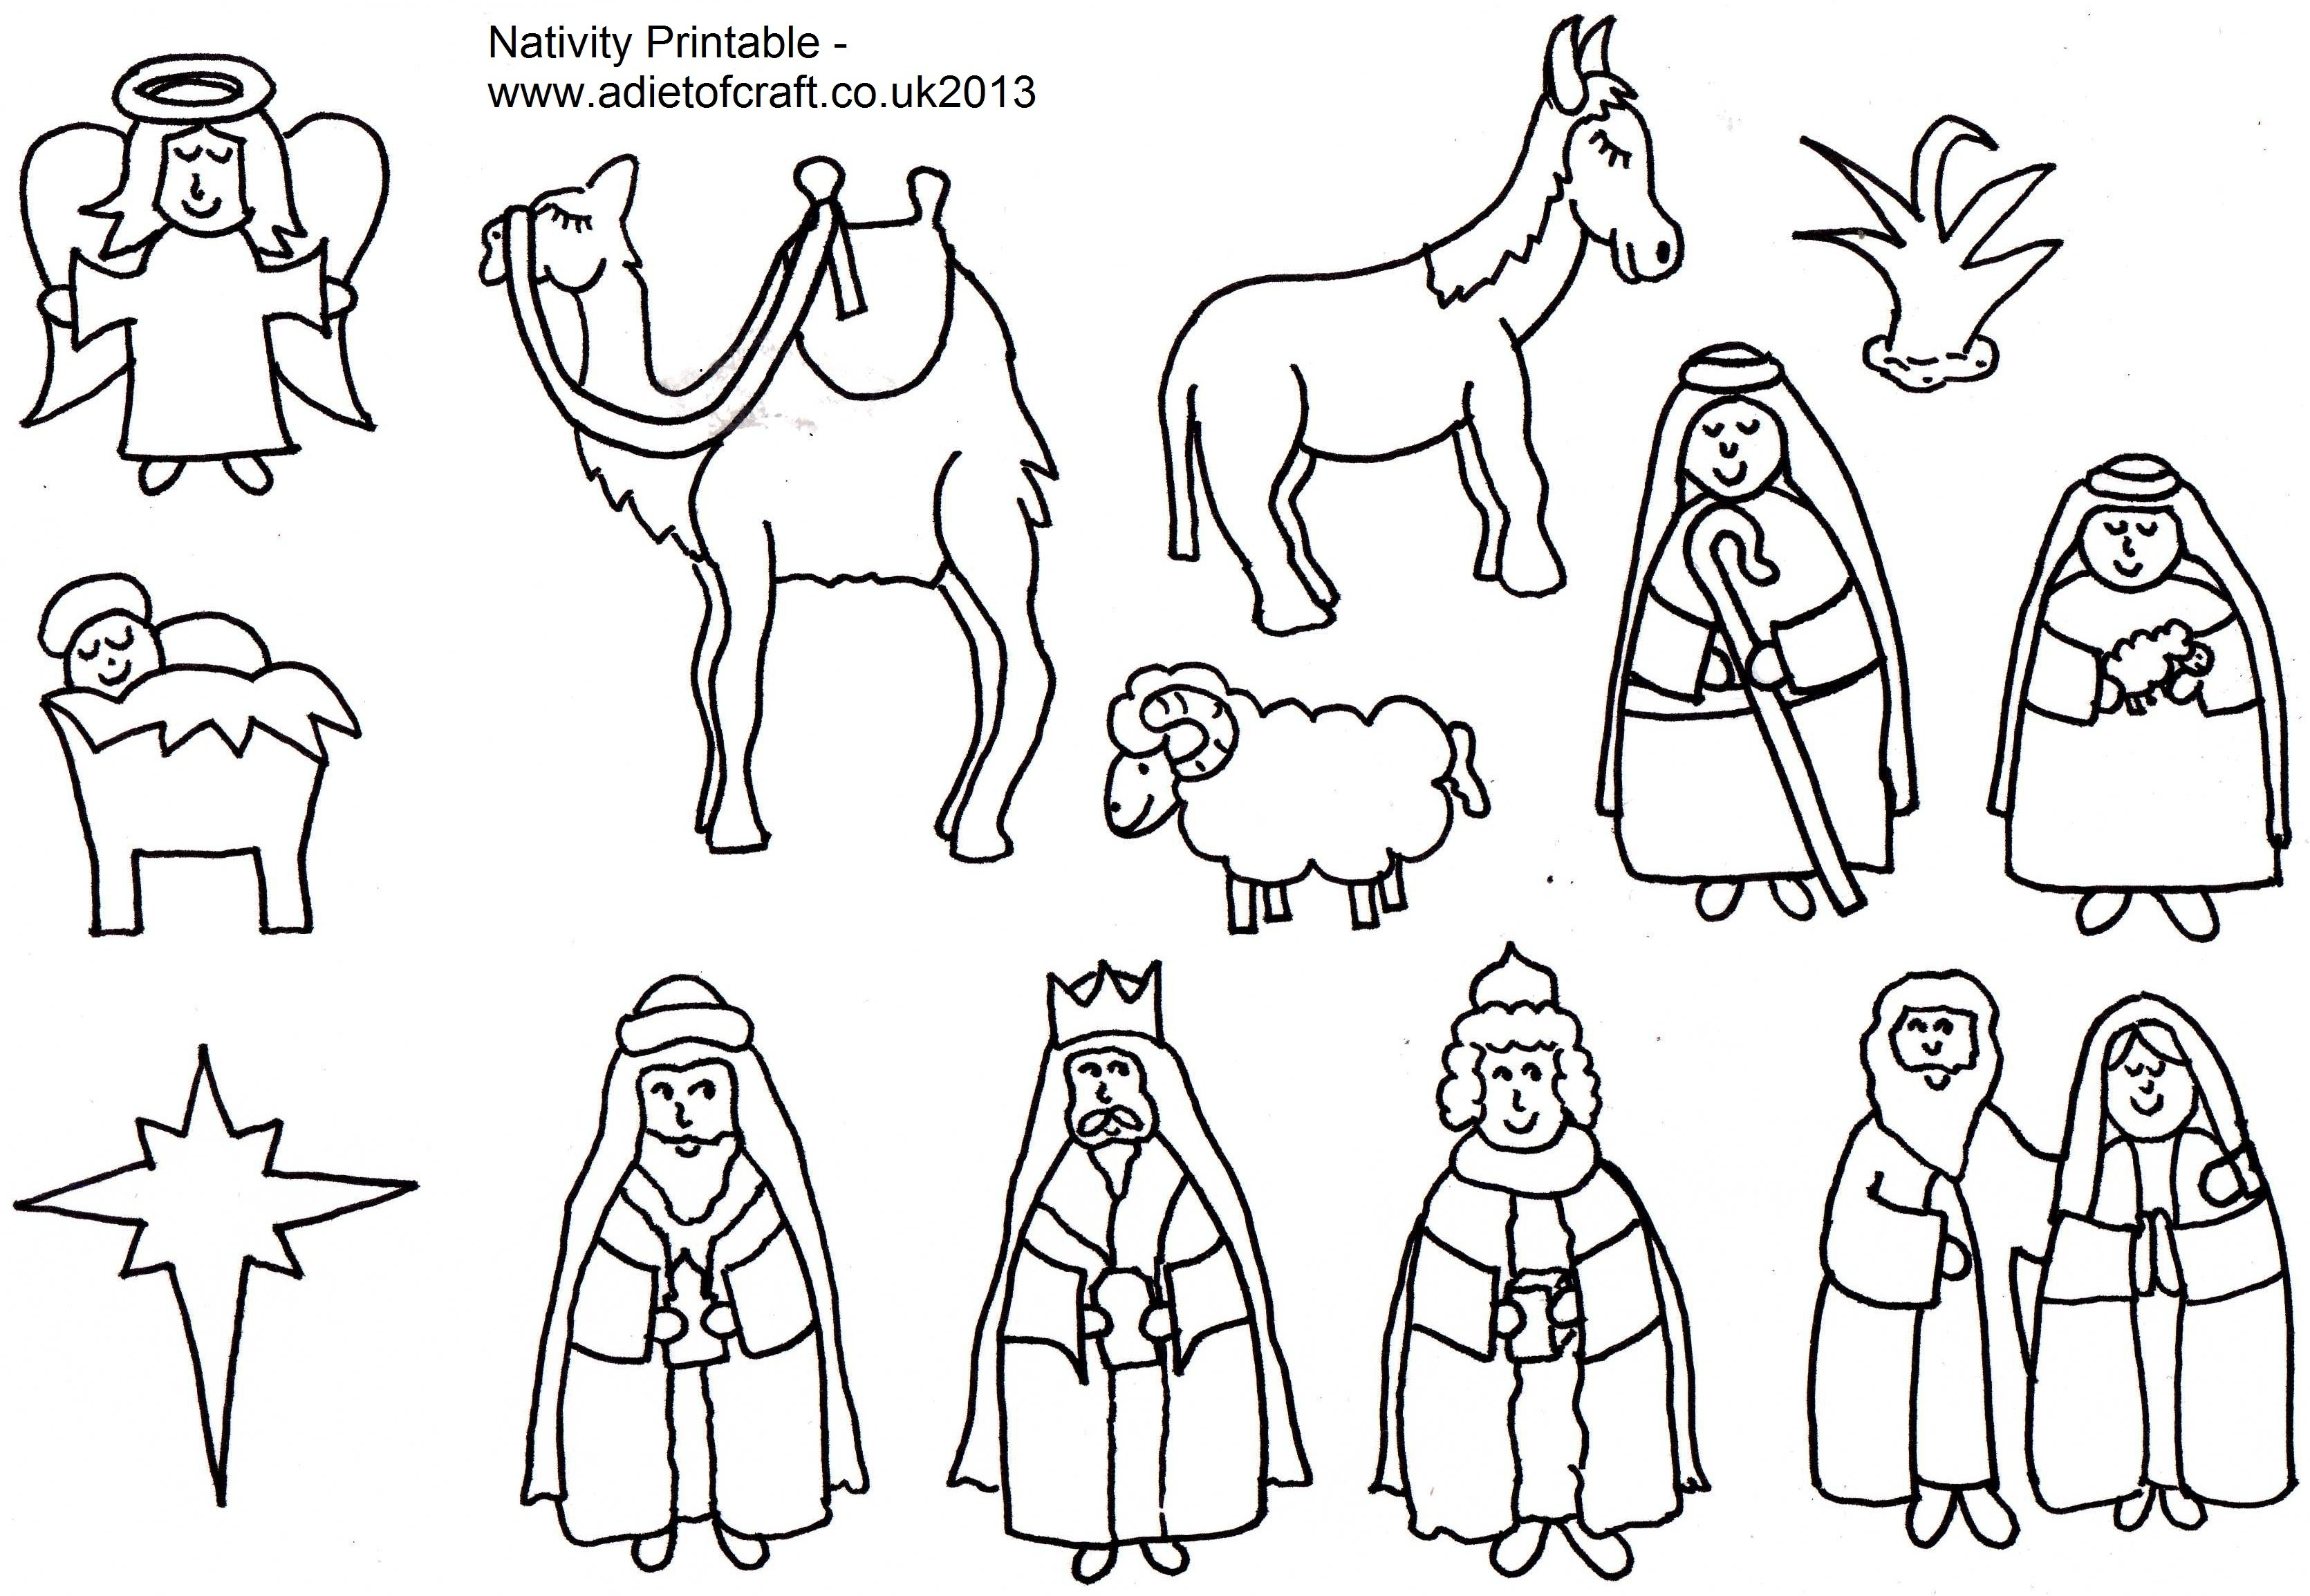 Baby Jesus In The Manger Coloring Pages at GetColorings.com | Free